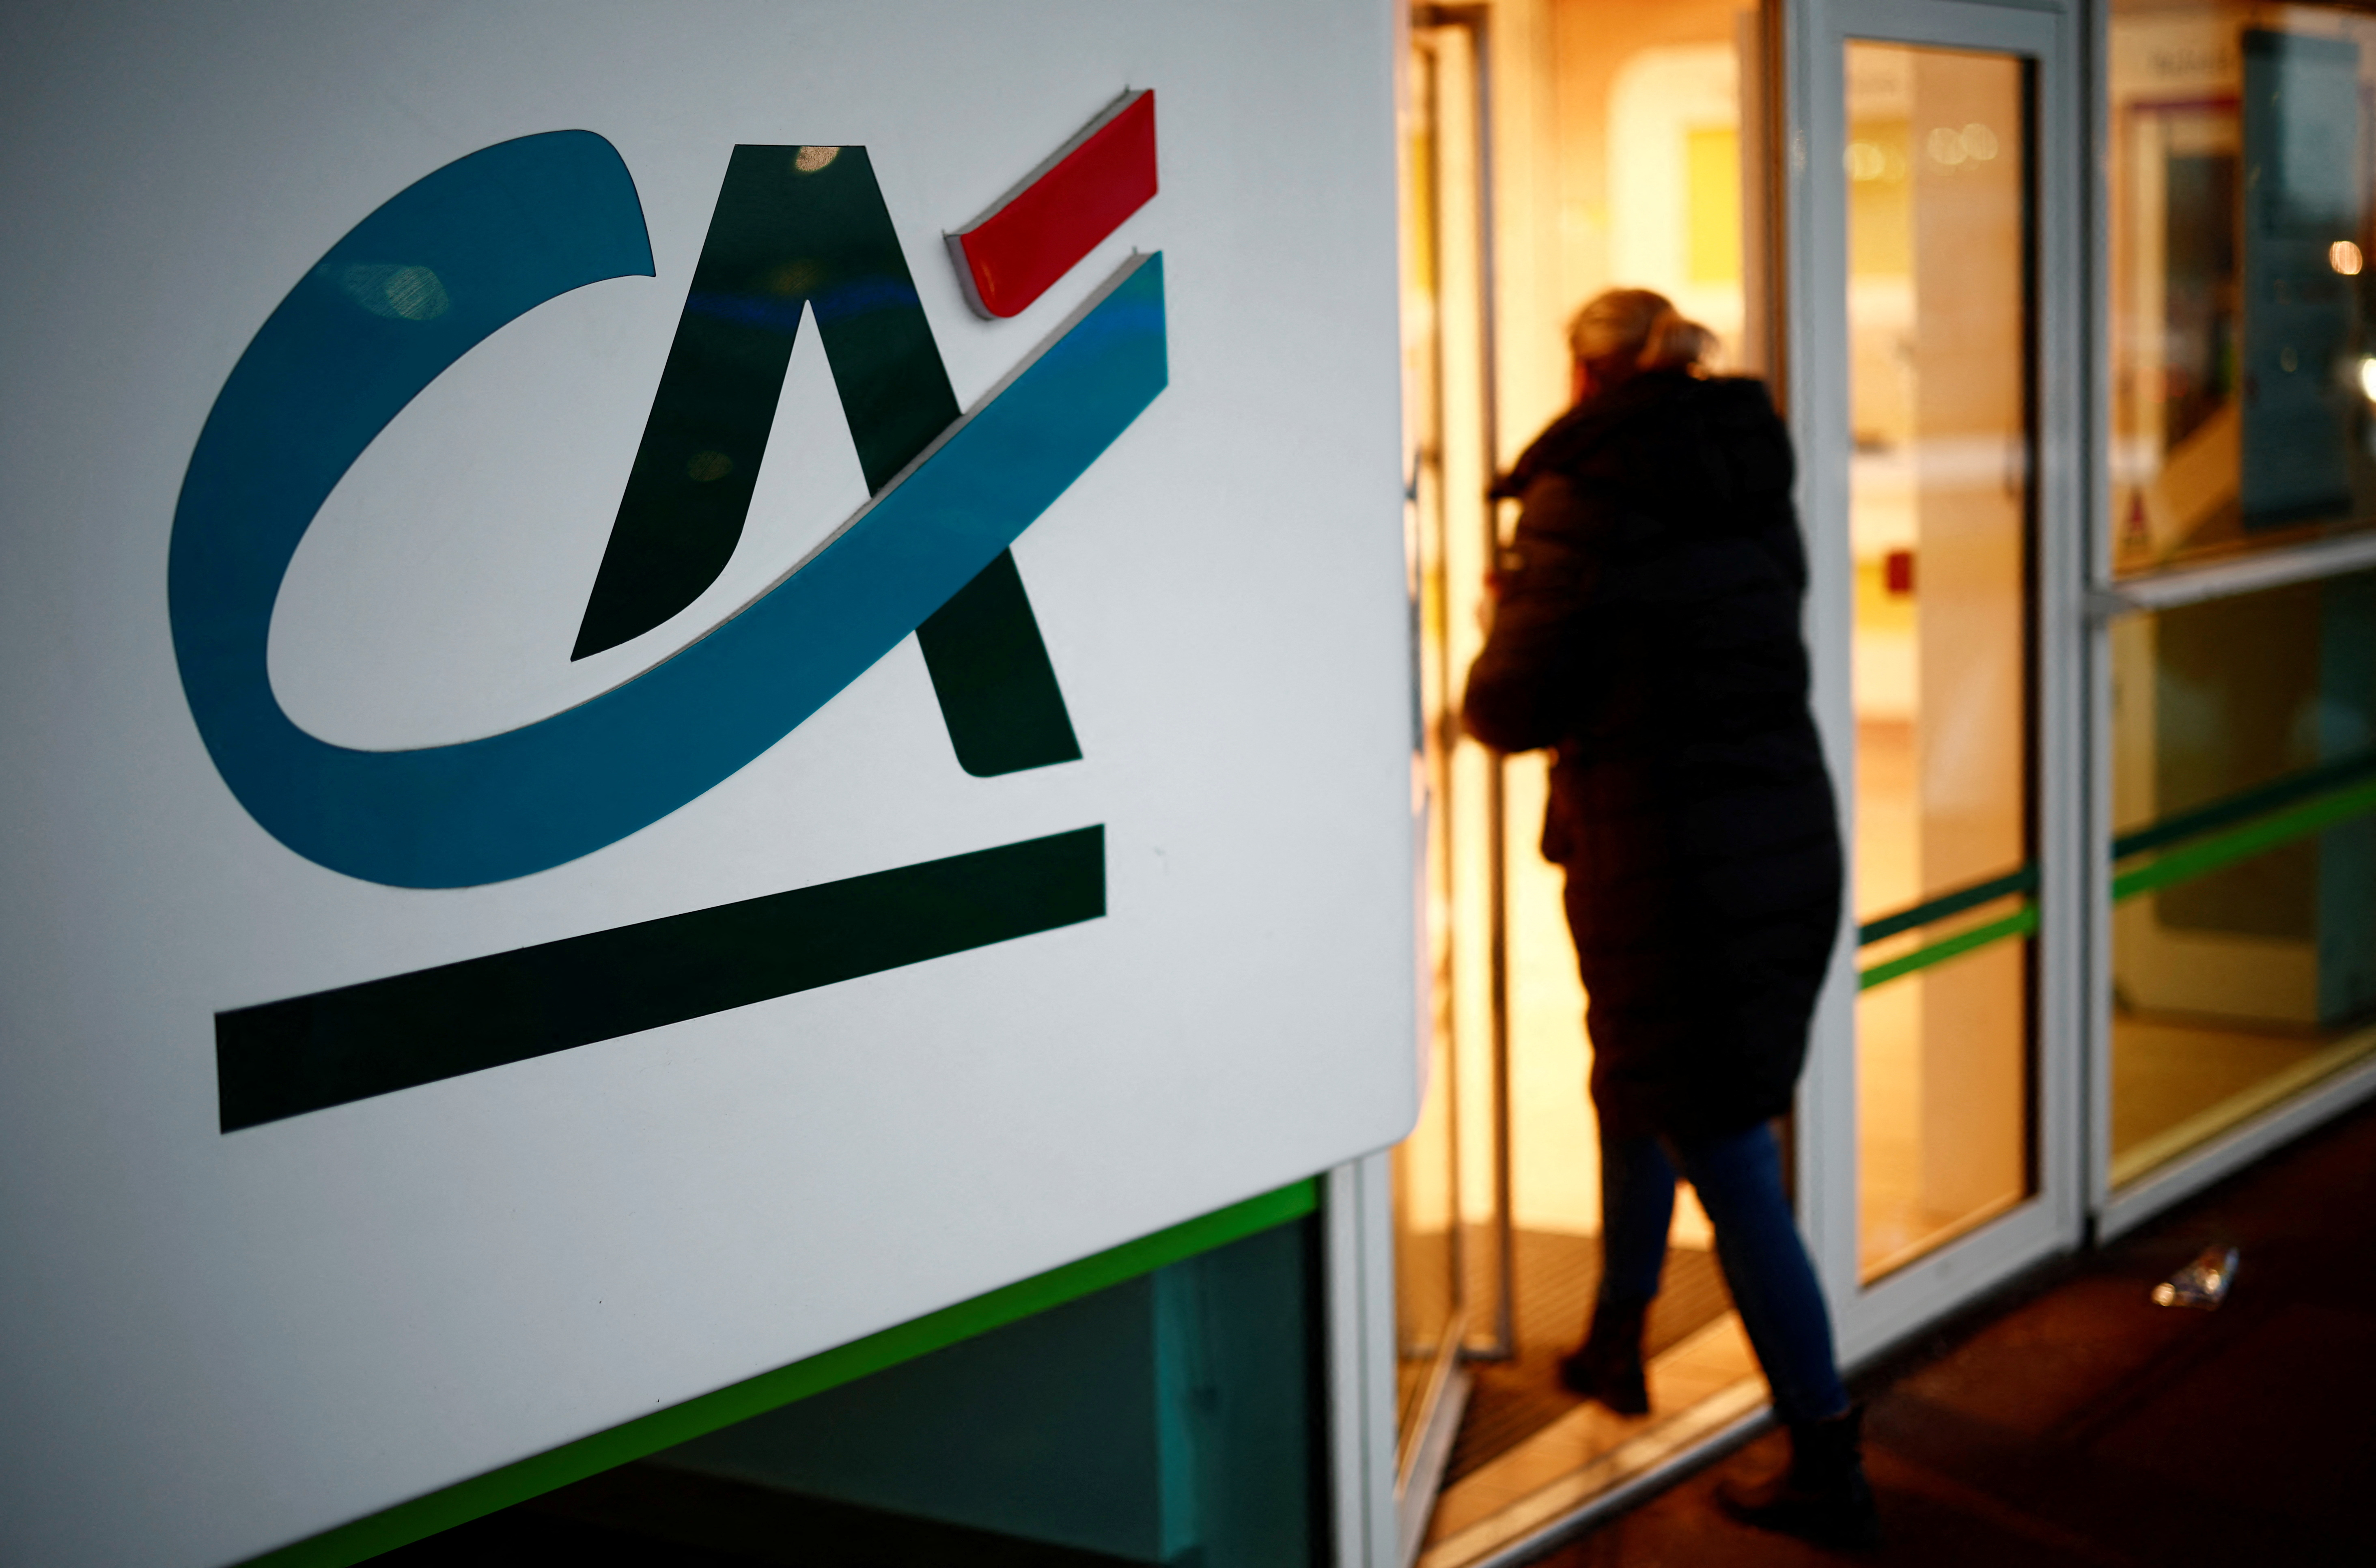 The logo of Credit Agricole near Nantes